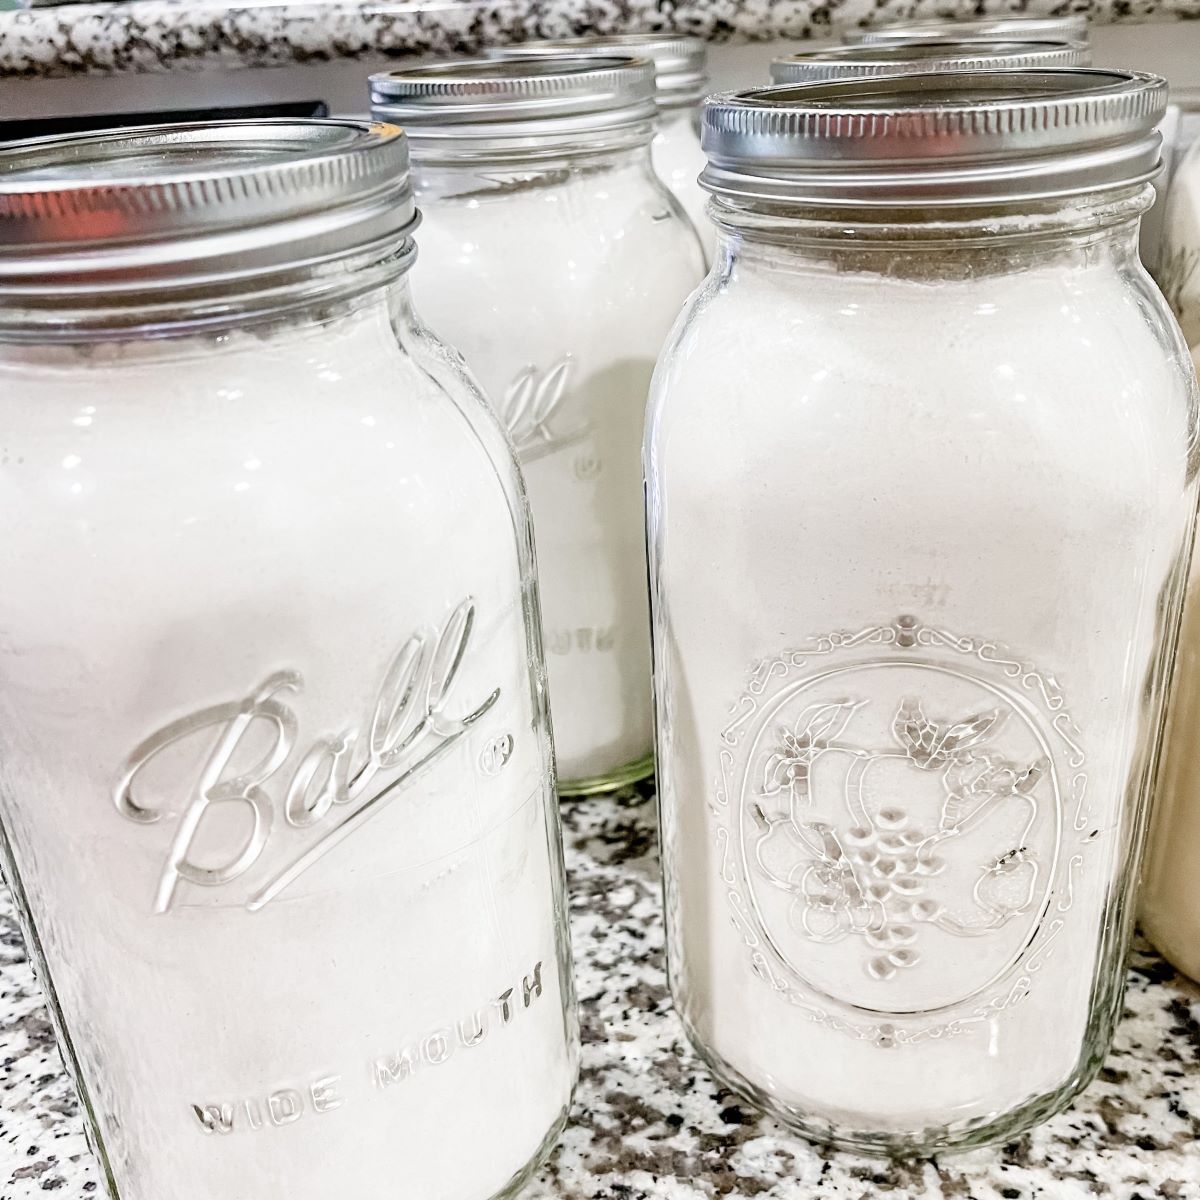 How To Store Flour In Mason Jars